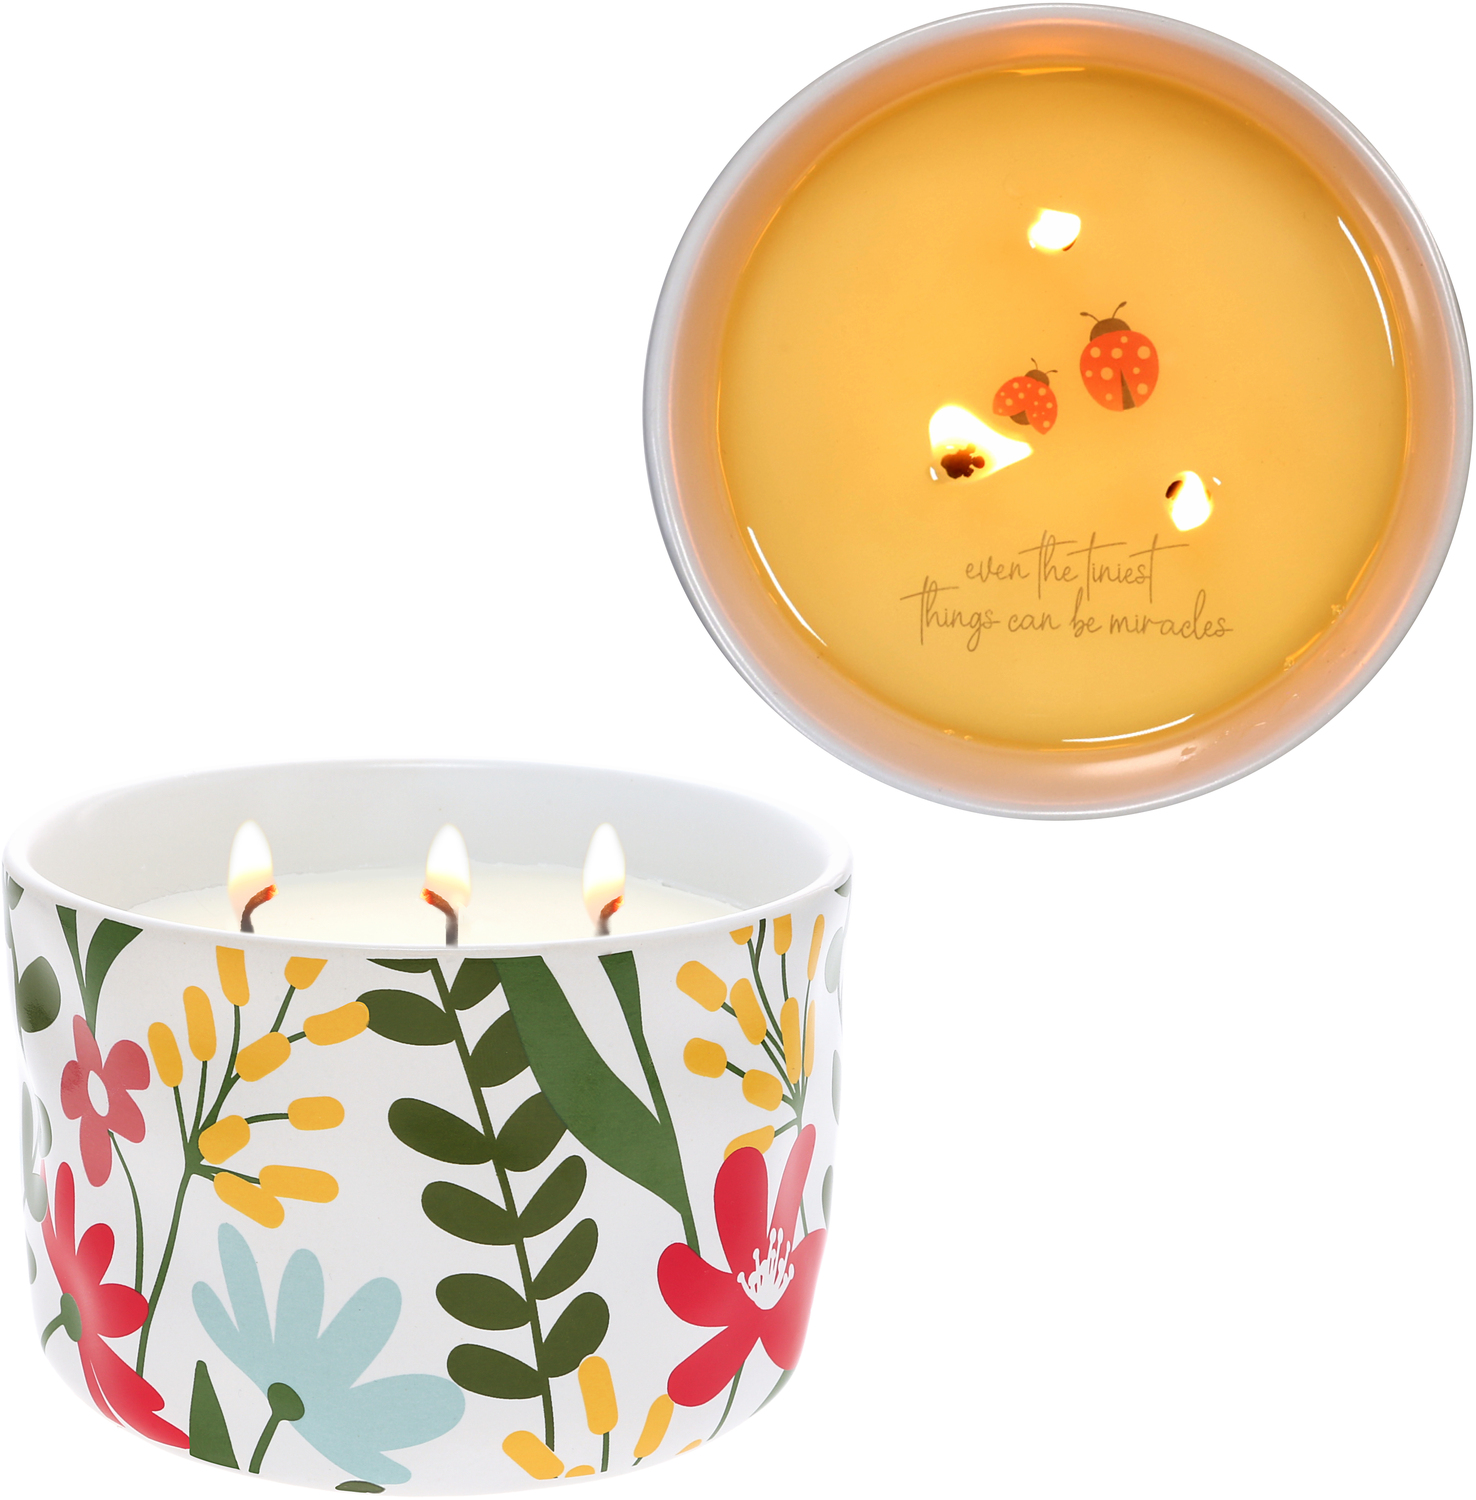 Miracles by Grateful Garden - Miracles - 12 oz - 100% Soy Wax Reveal Triple Wick Candle
Scent: Tranquility